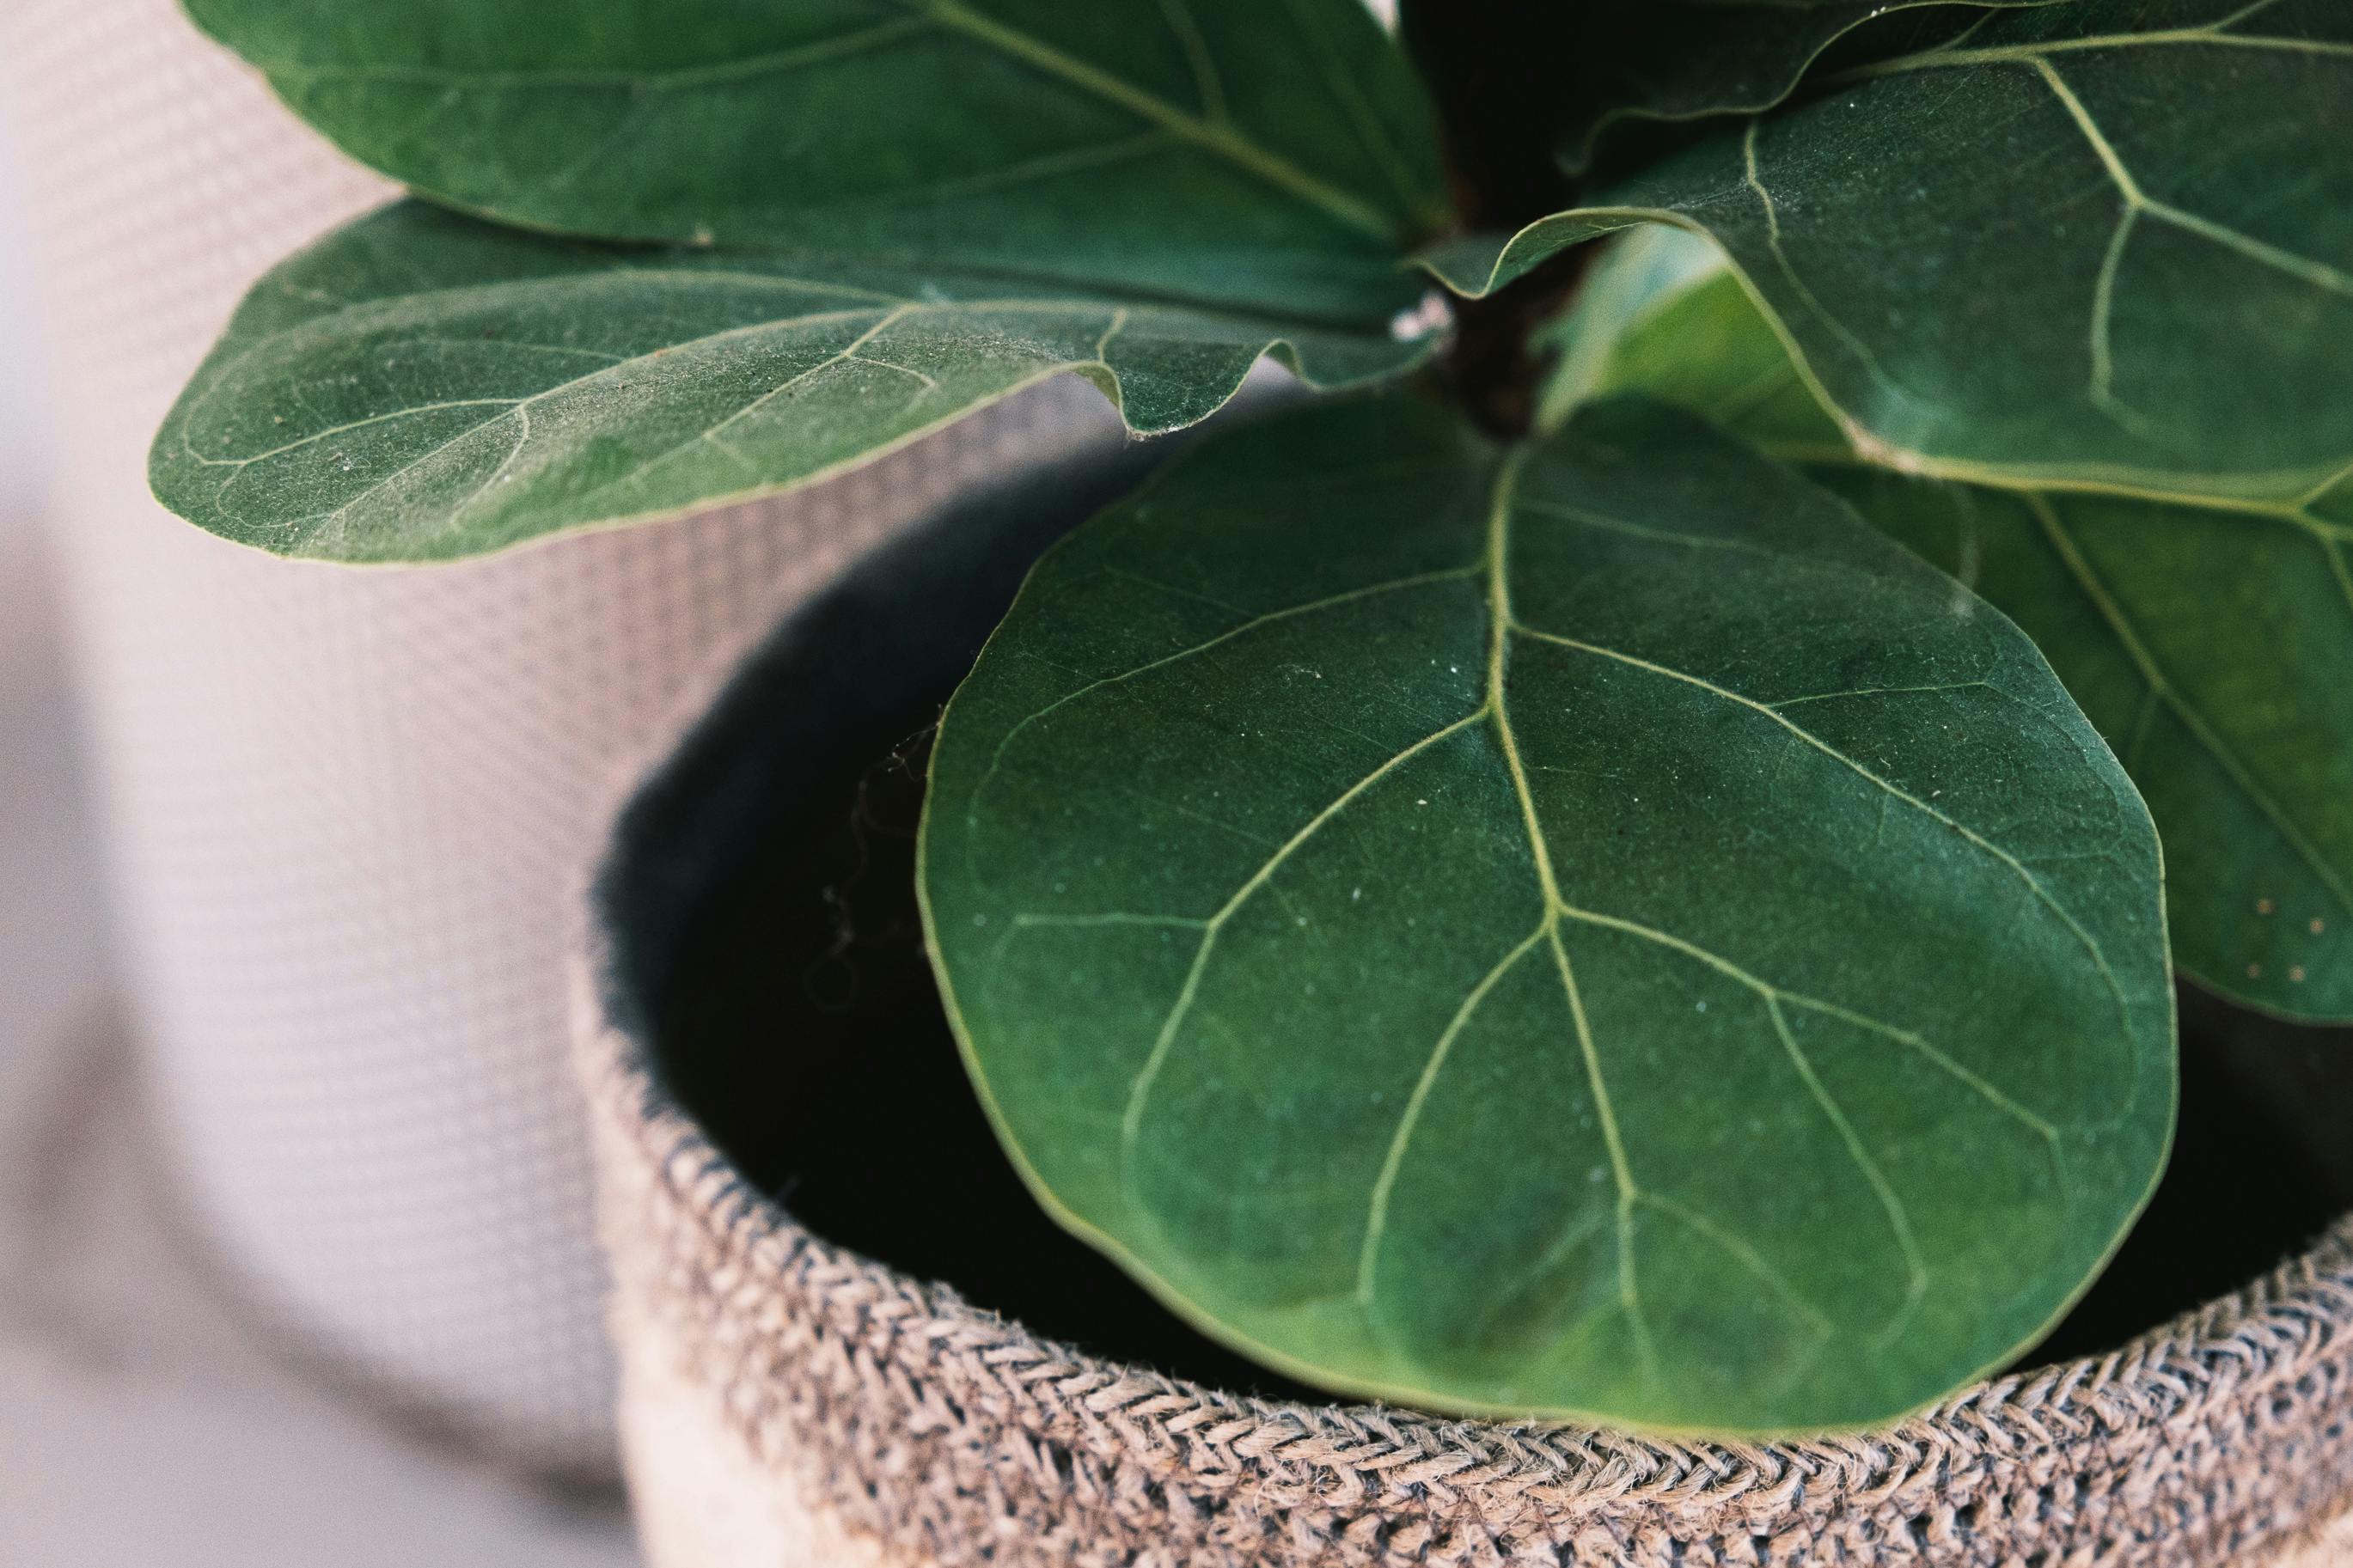 Close up of fiddle leaf fig with veins on leaves growing in pot with knitted cover in light room on blurred background